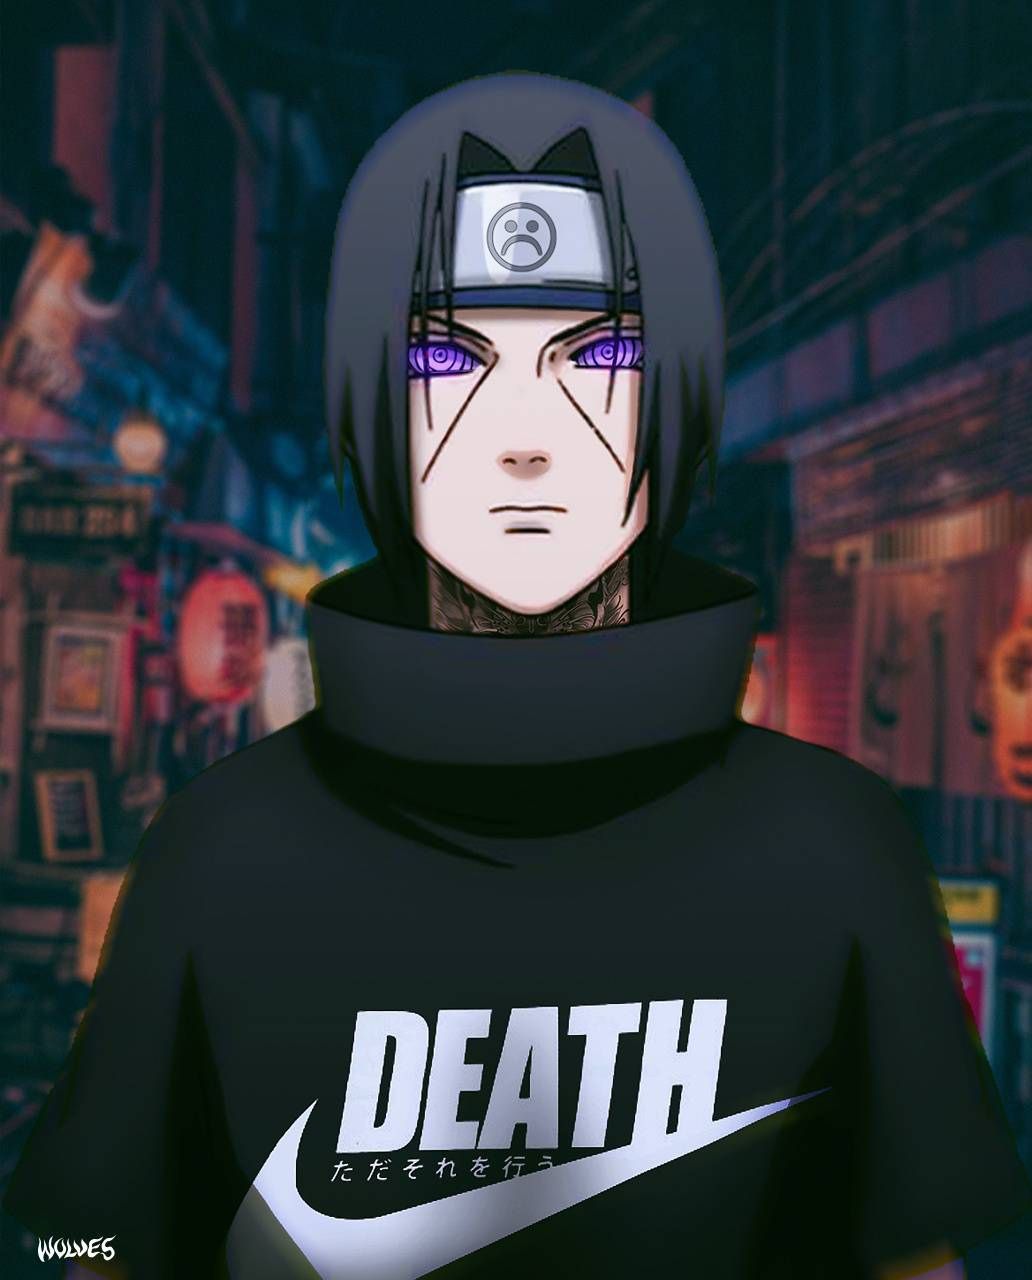 Itachi Desktop Wallpaper Aesthetic, A collection of the itachi aesthetic wallpaper and background available for download for free